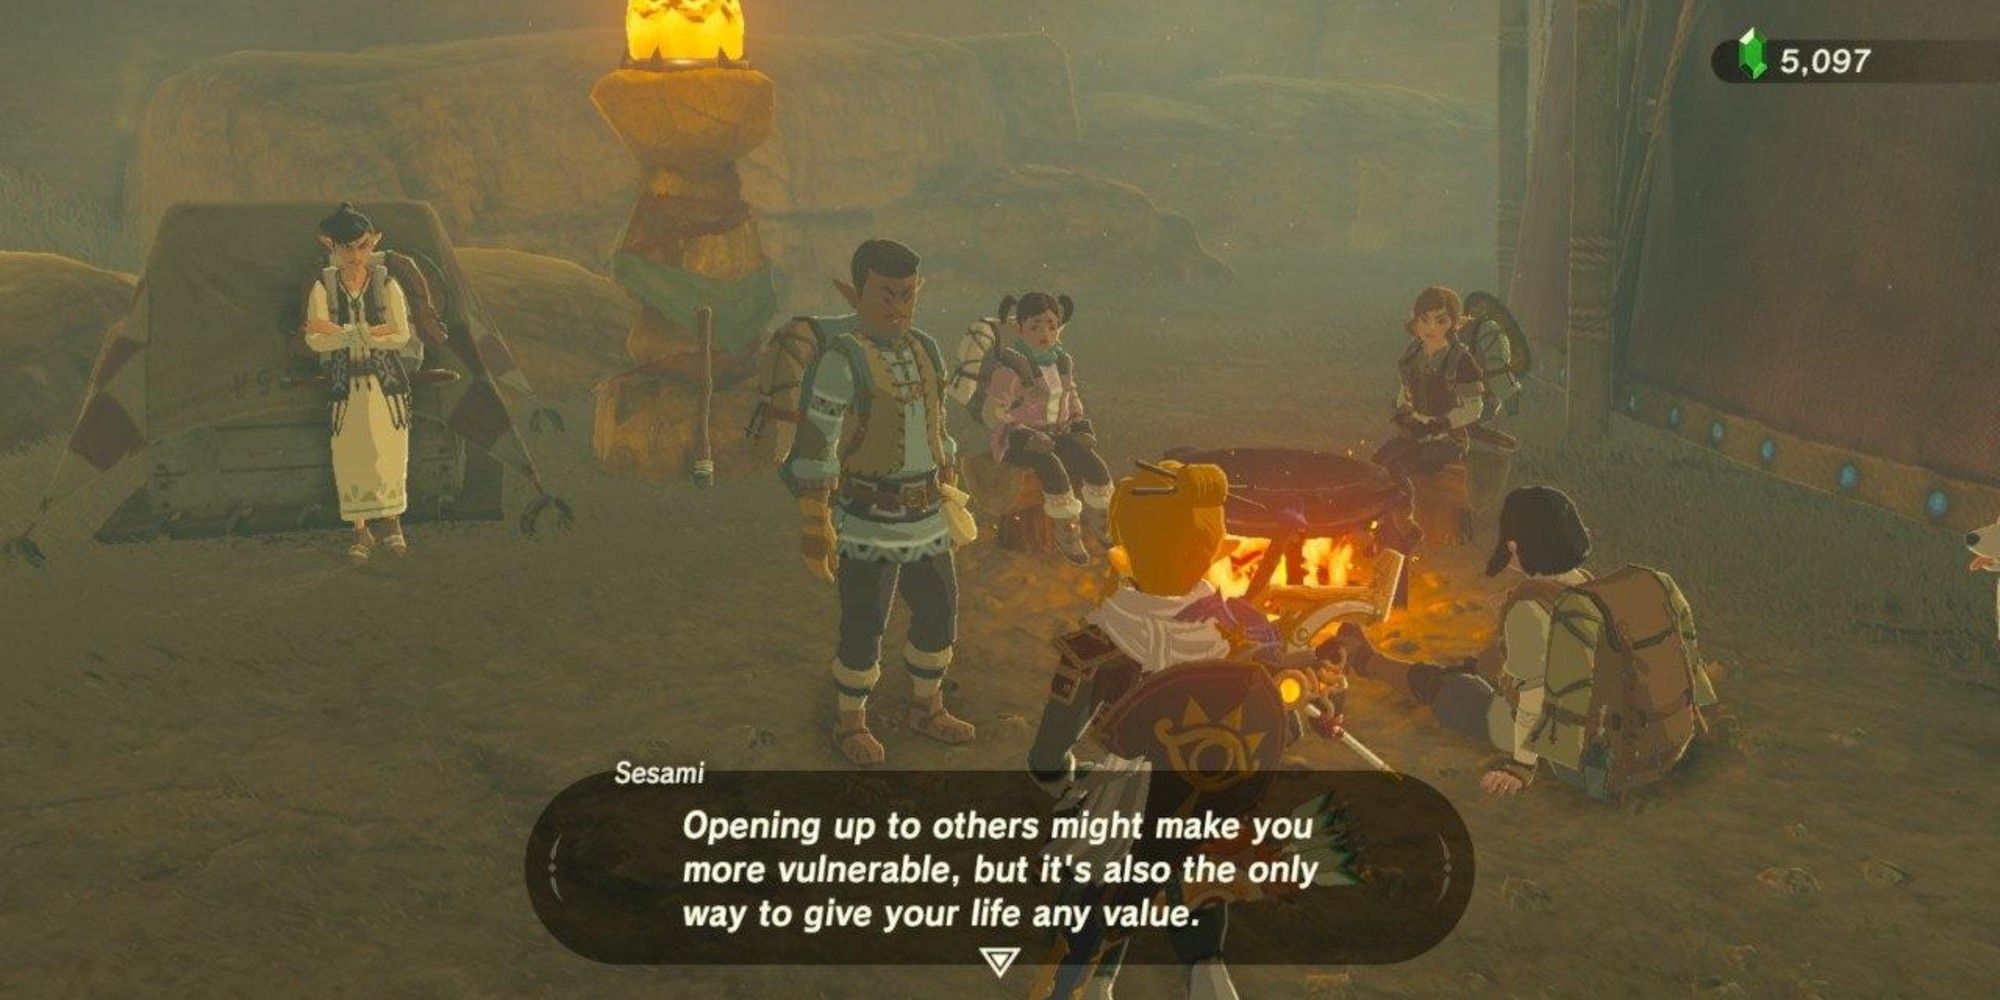 Link to the conversation with Sesami in the Gerudo Canyon Stables